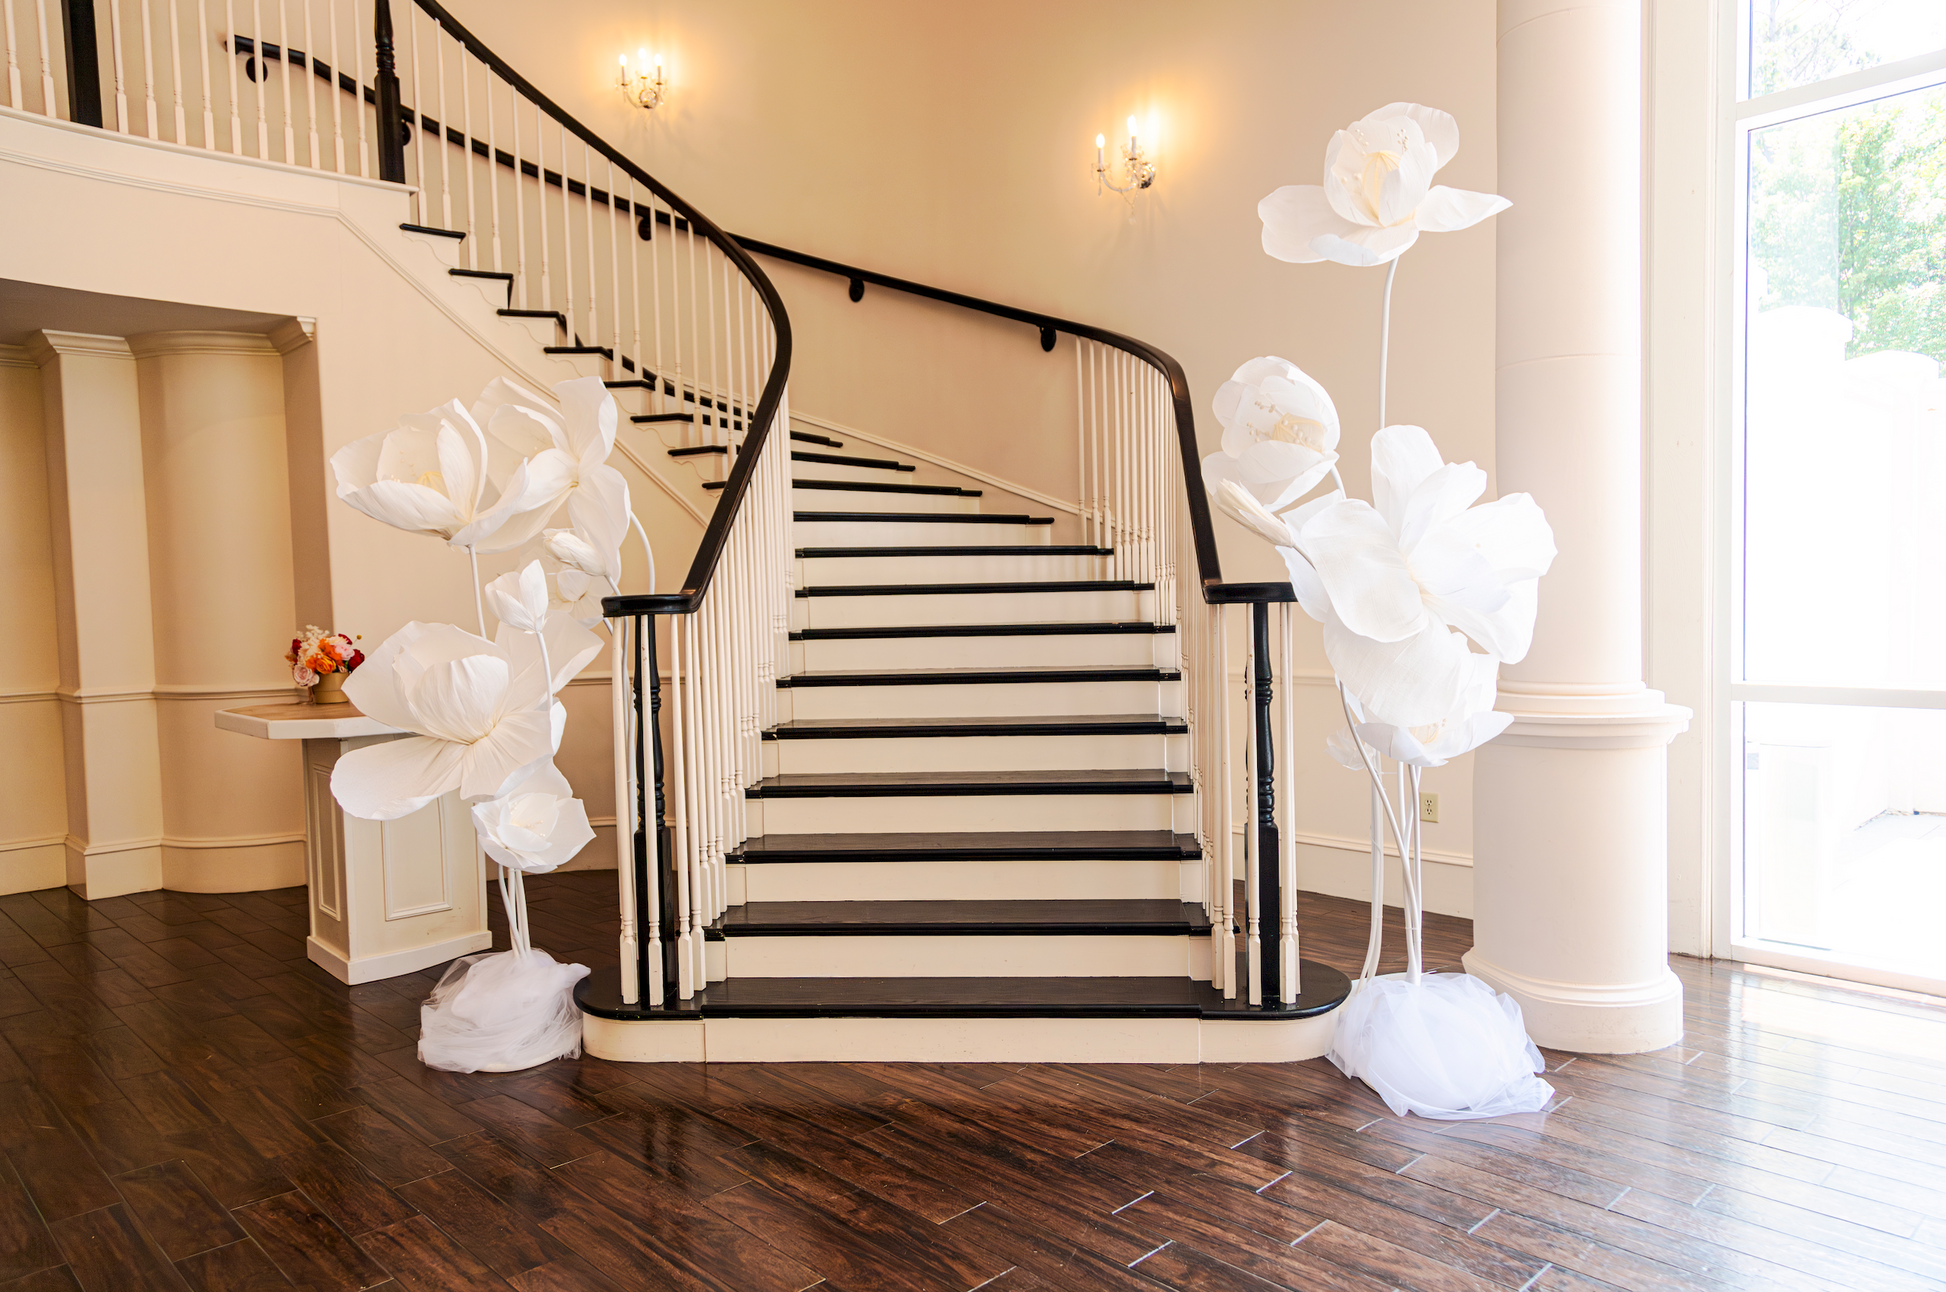 Giant White Flowers for stairs decor